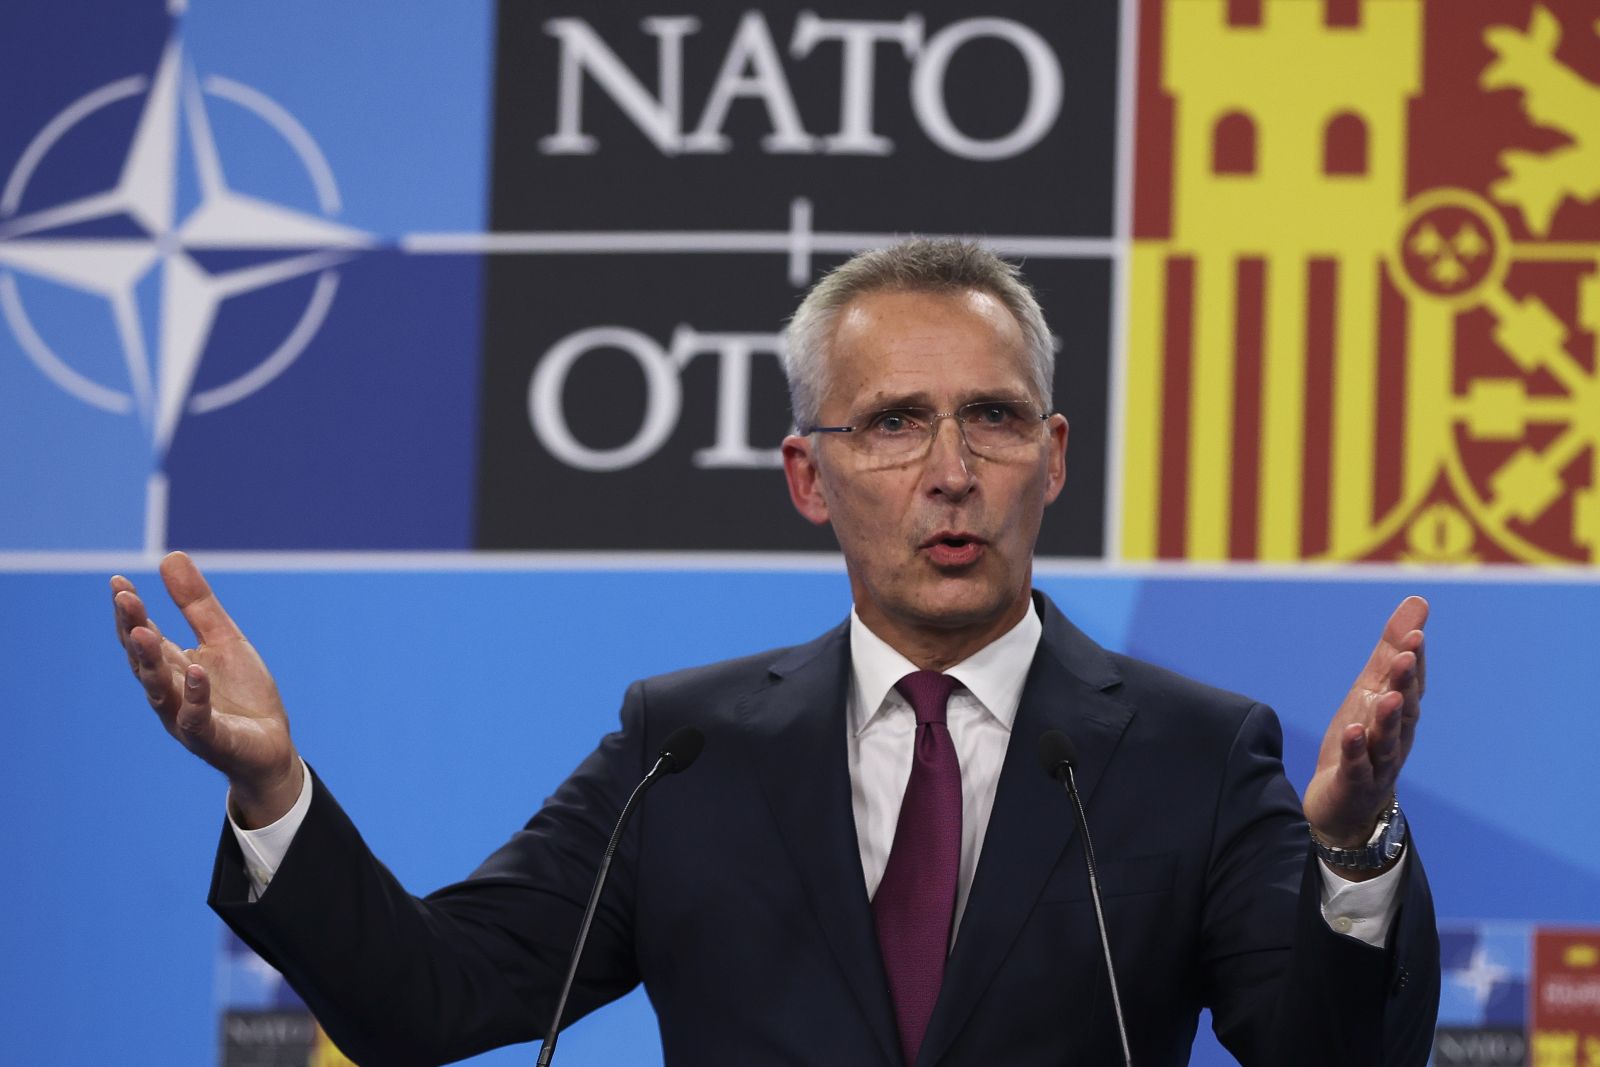 epa10039541 The Secretary General of NATO, Jens Stoltenberg, offers a press conference after the signing of an agreement to unblock the Turkish veto to the accession of Finland and Sweden to NATO, in Madrid, Spain, 28 June 2022.  EPA/Kiko Huesca